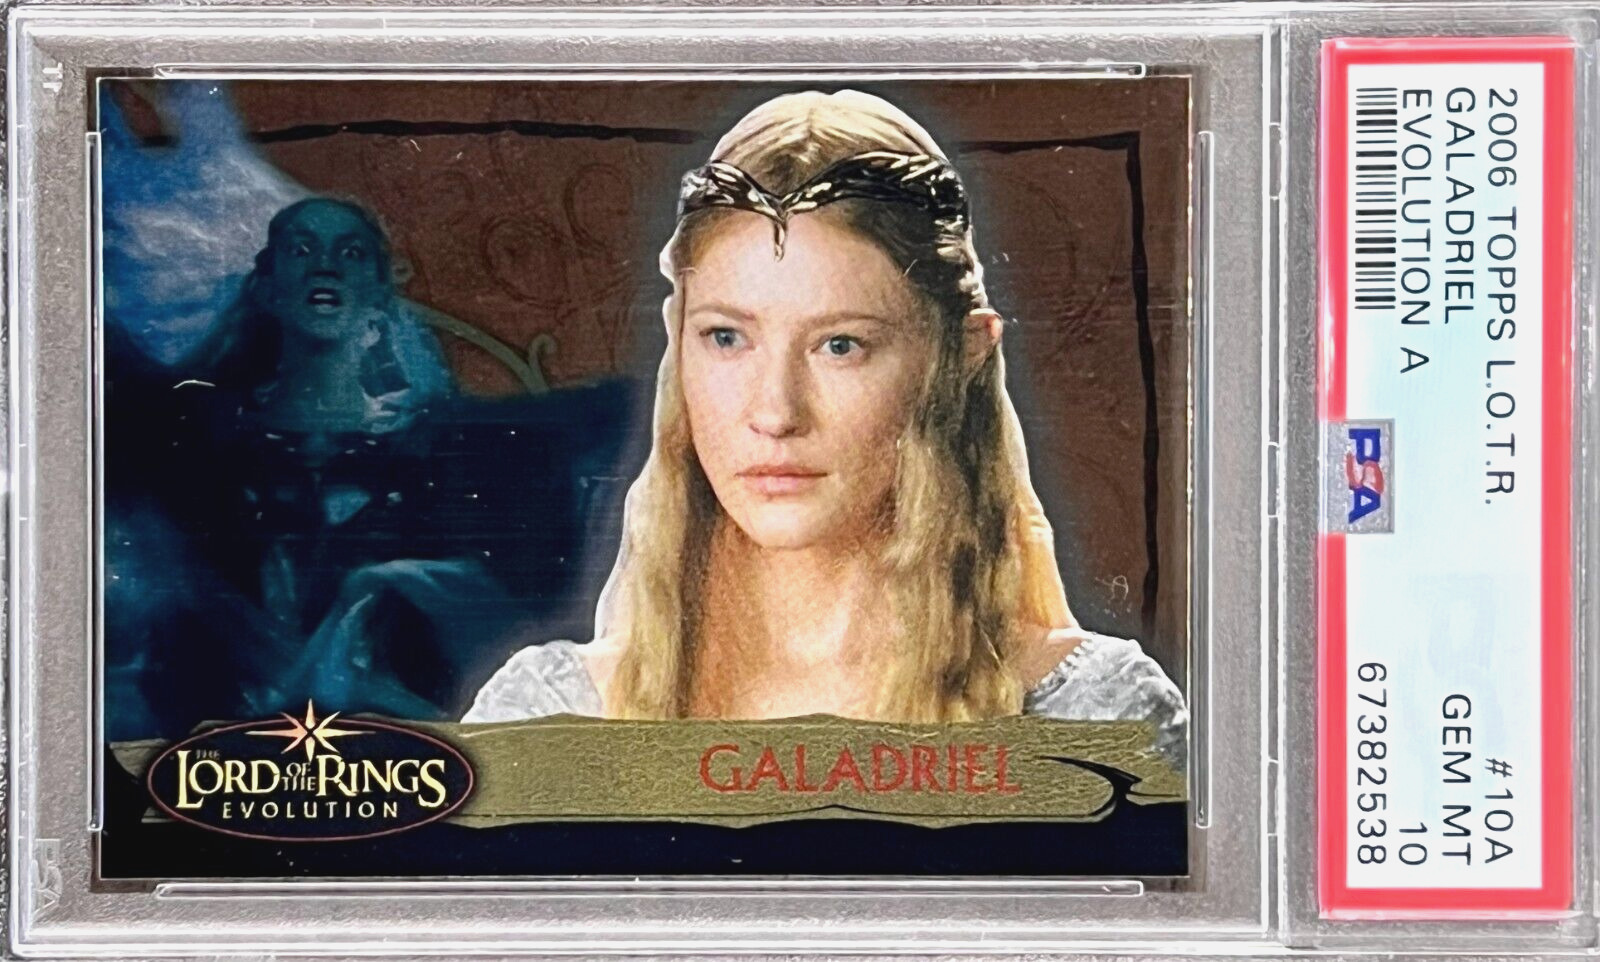 2006 Topps Lord of the Rings Galadriel #10A PSA 10 GEM MINT (RARE: Population 1)